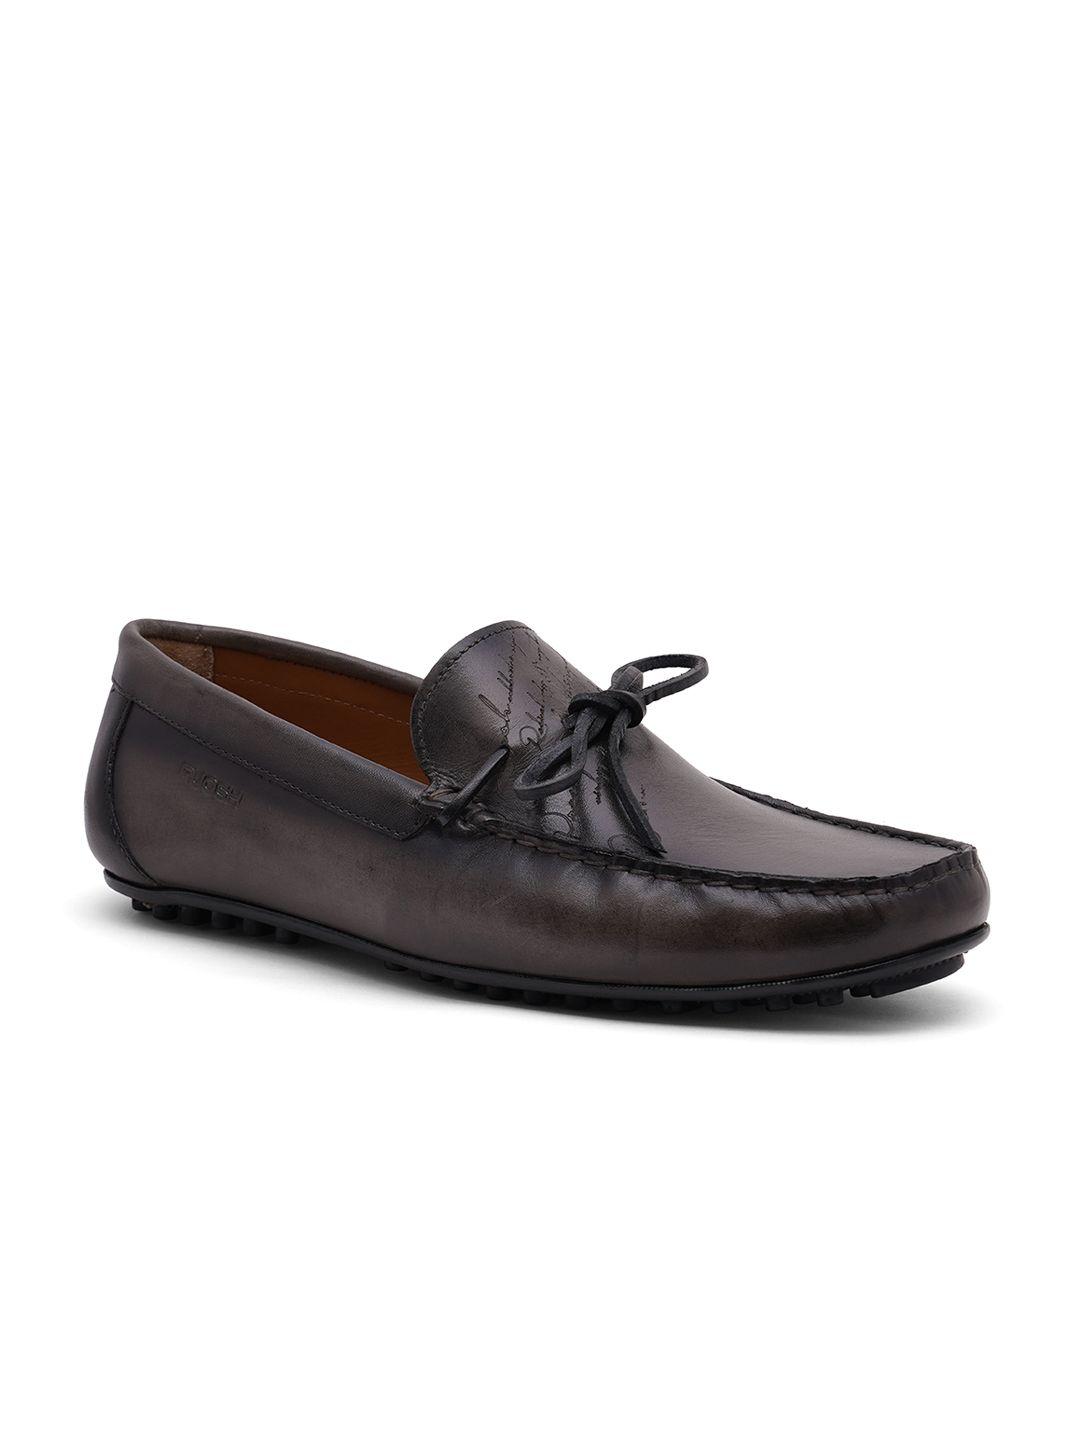 ruosh-men-grey-solid-leather-loafers